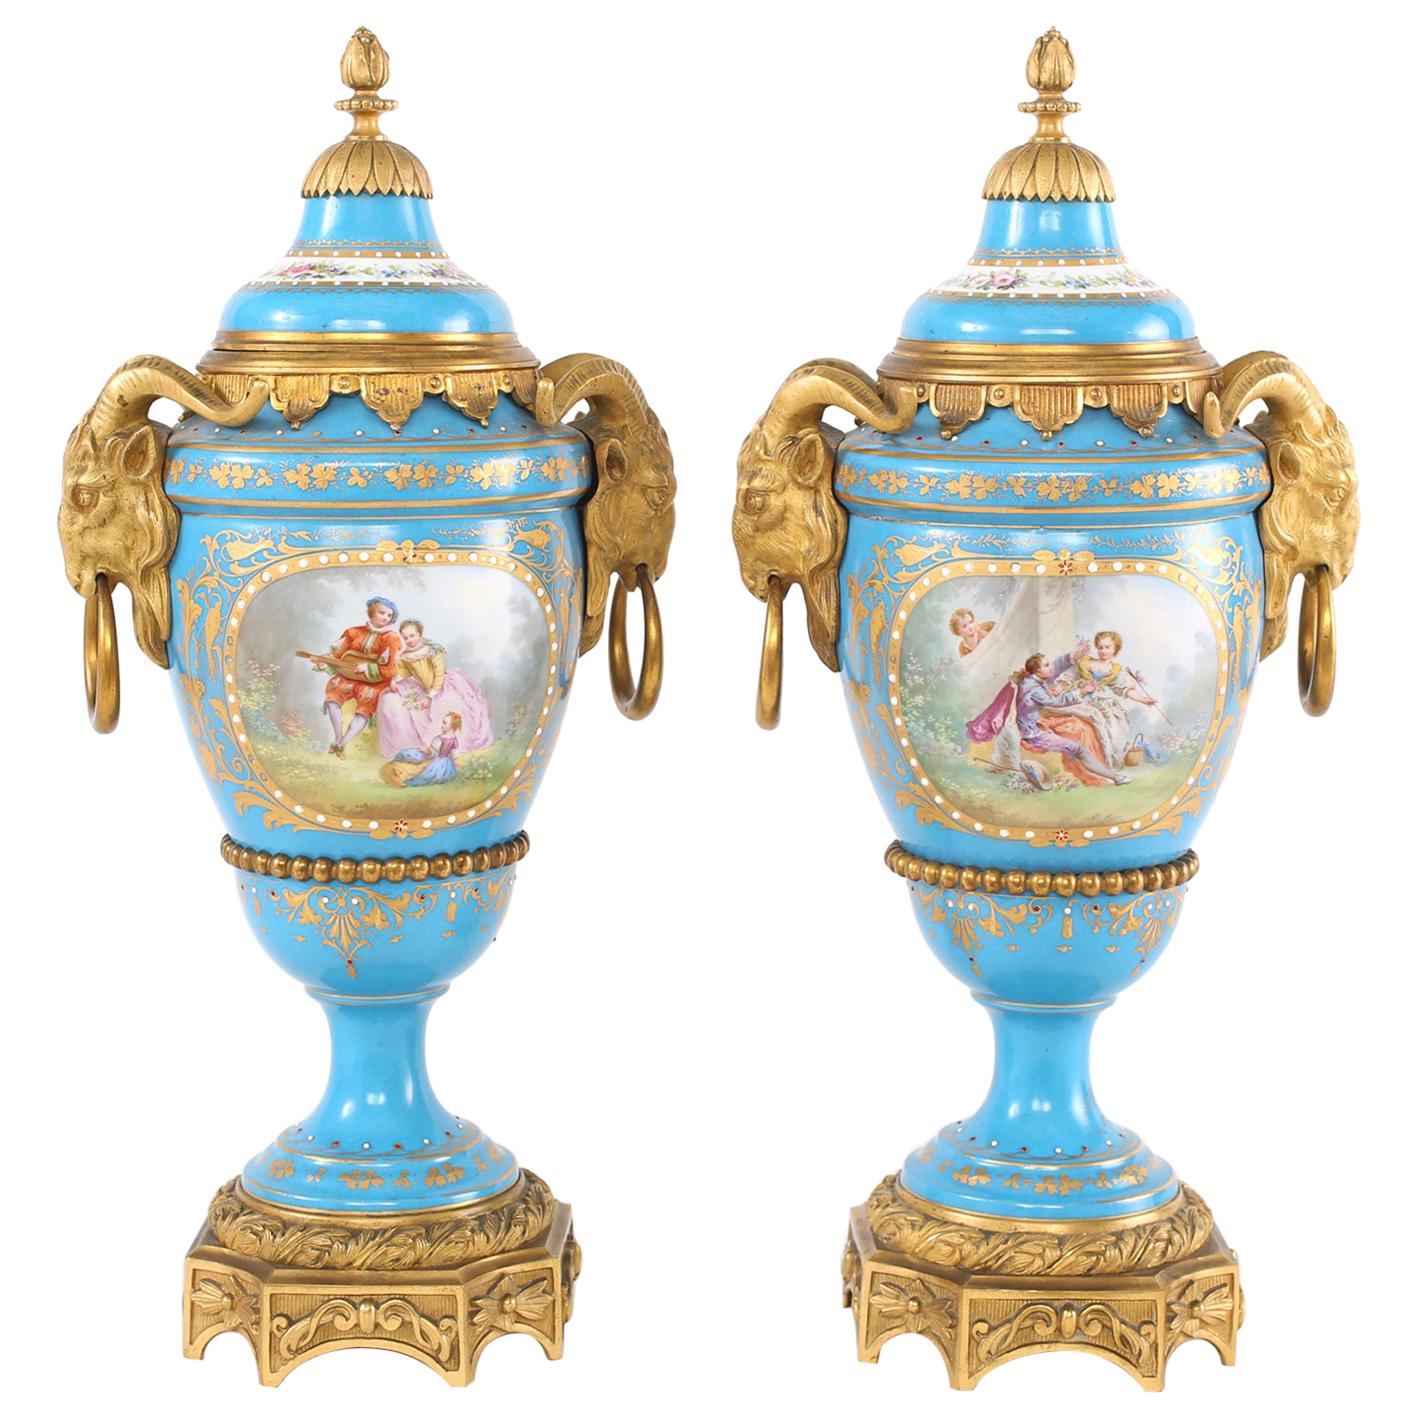 19th Century Bronze Mounted / Porcelain Covered Urns For Sale